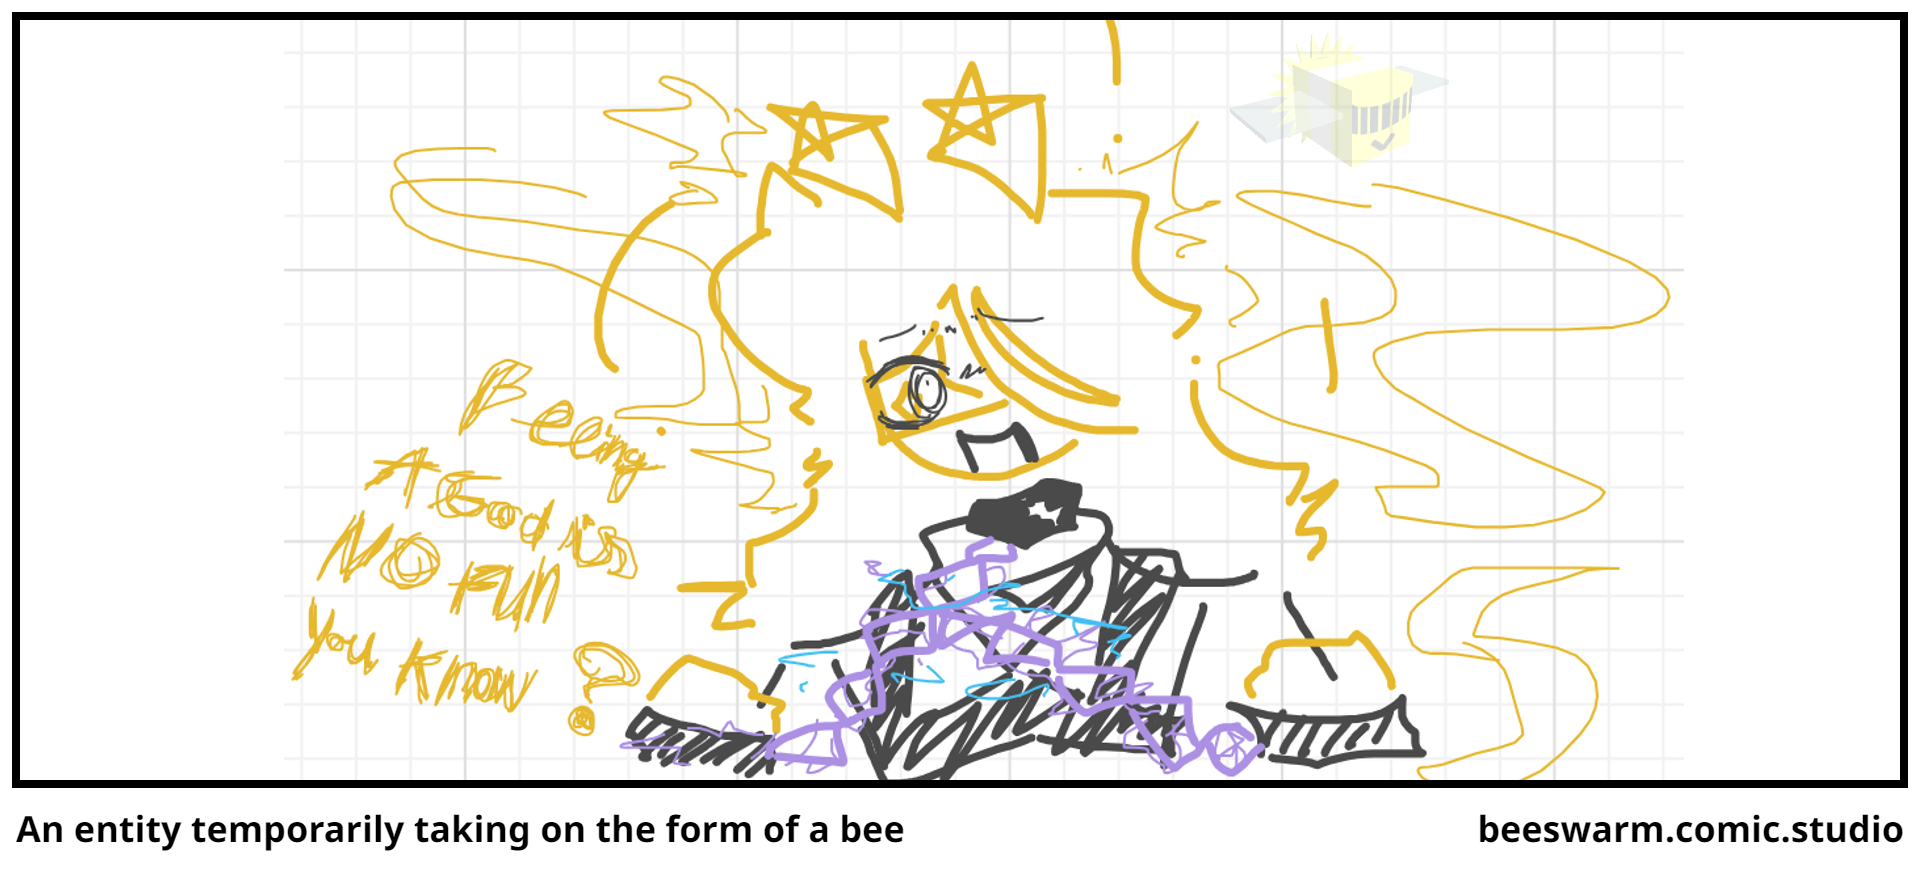 An entity temporarily taking on the form of a bee